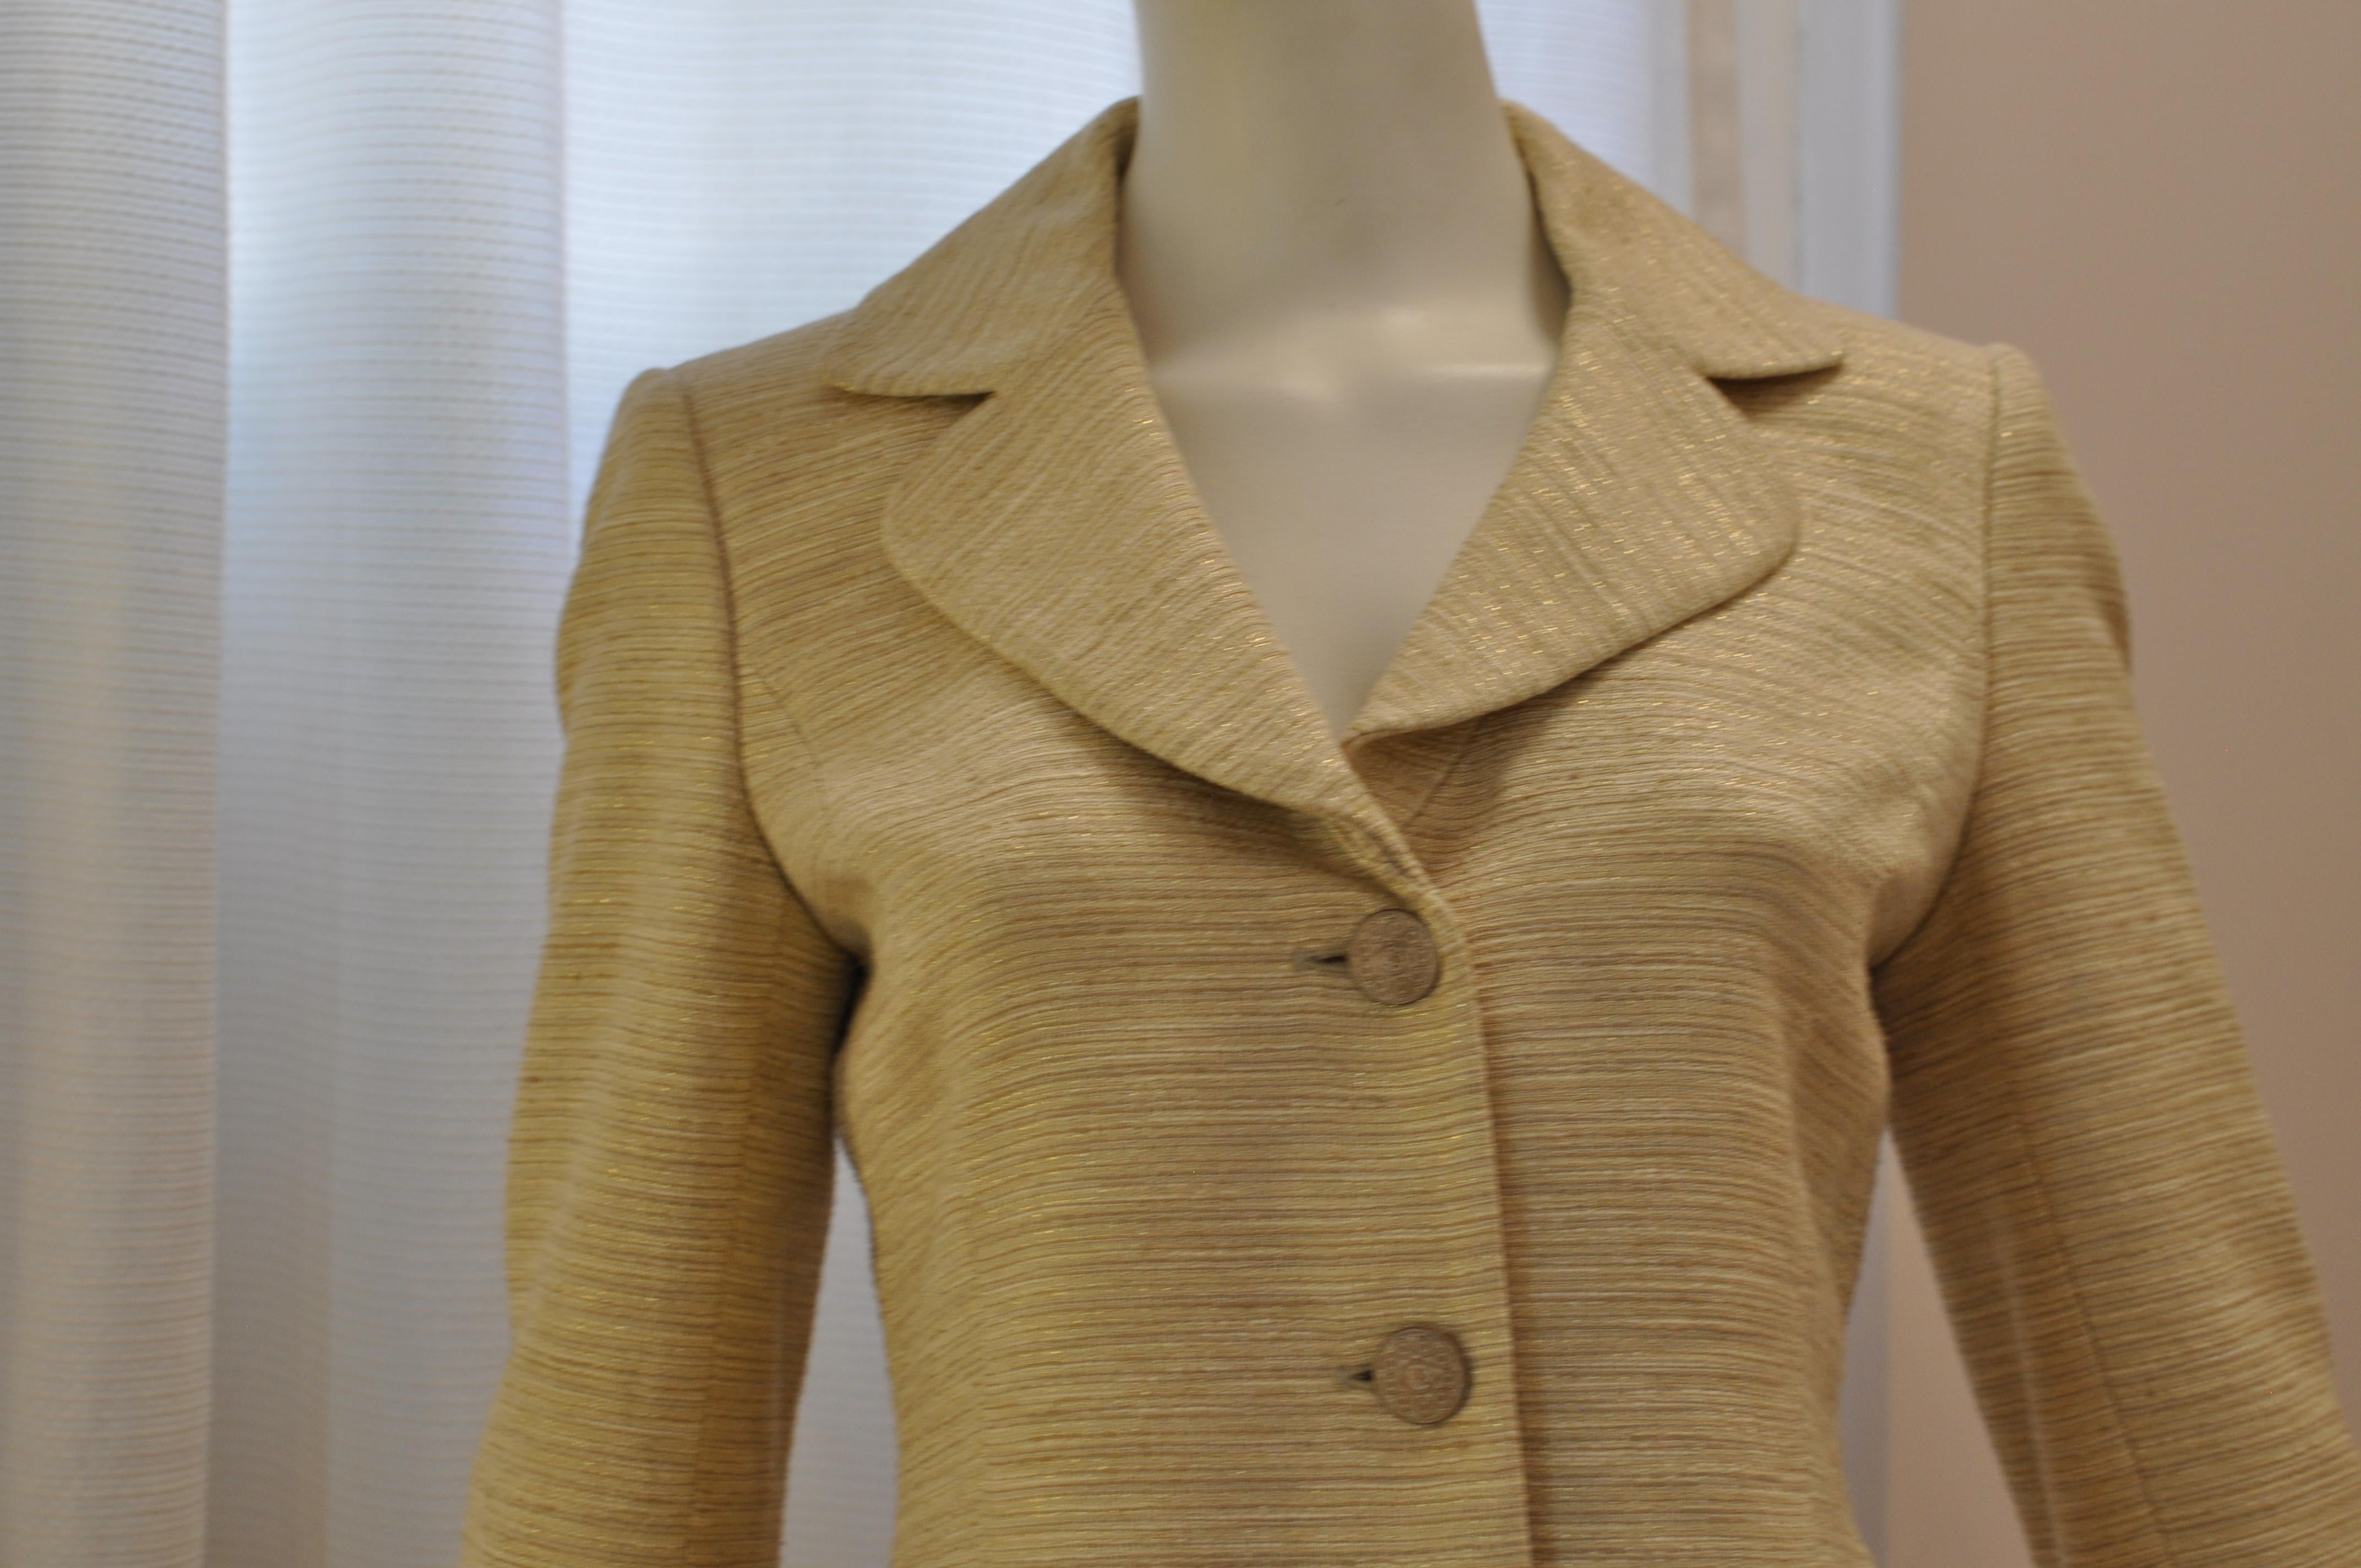 This jacket glimmers with a combination of cotton and acetate with gold fibers running through it.  The jacket has a very nice notched collar; contrasting grosgrain cuffs (replicated with button band); an extra button still attached to the care